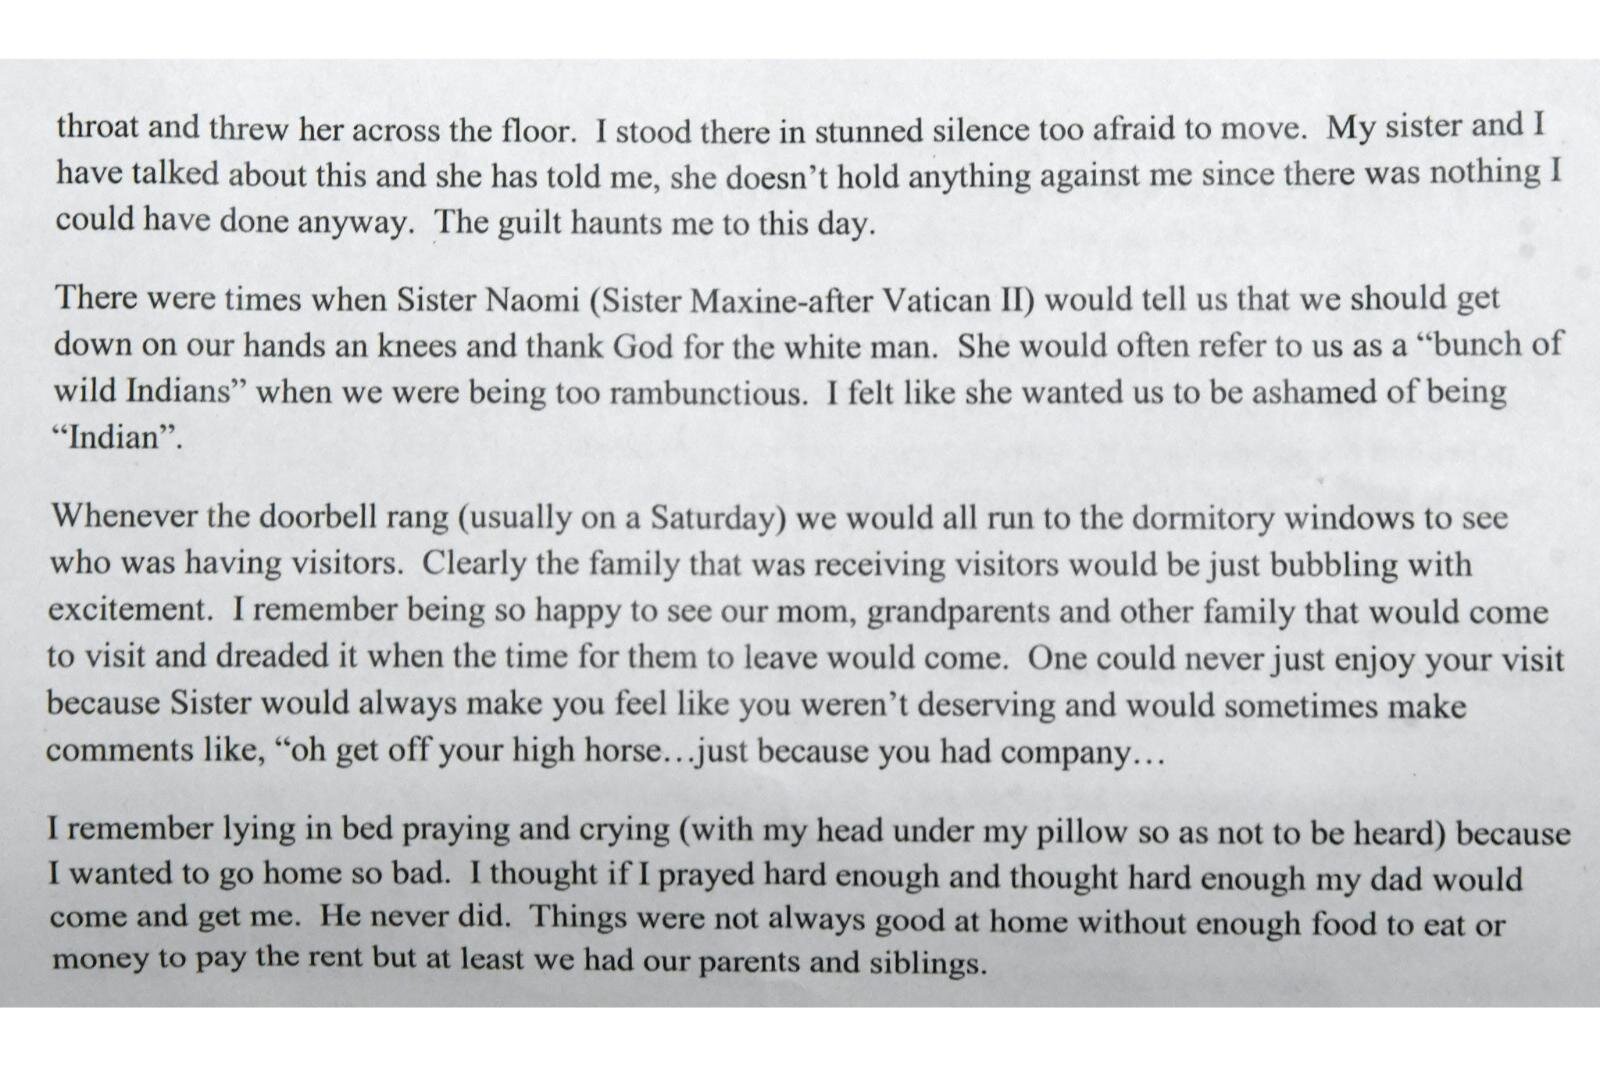 A page from the recollections of Sharon Skutt who was a student at Holy Childhood School of Jesus in Harbor Springs.